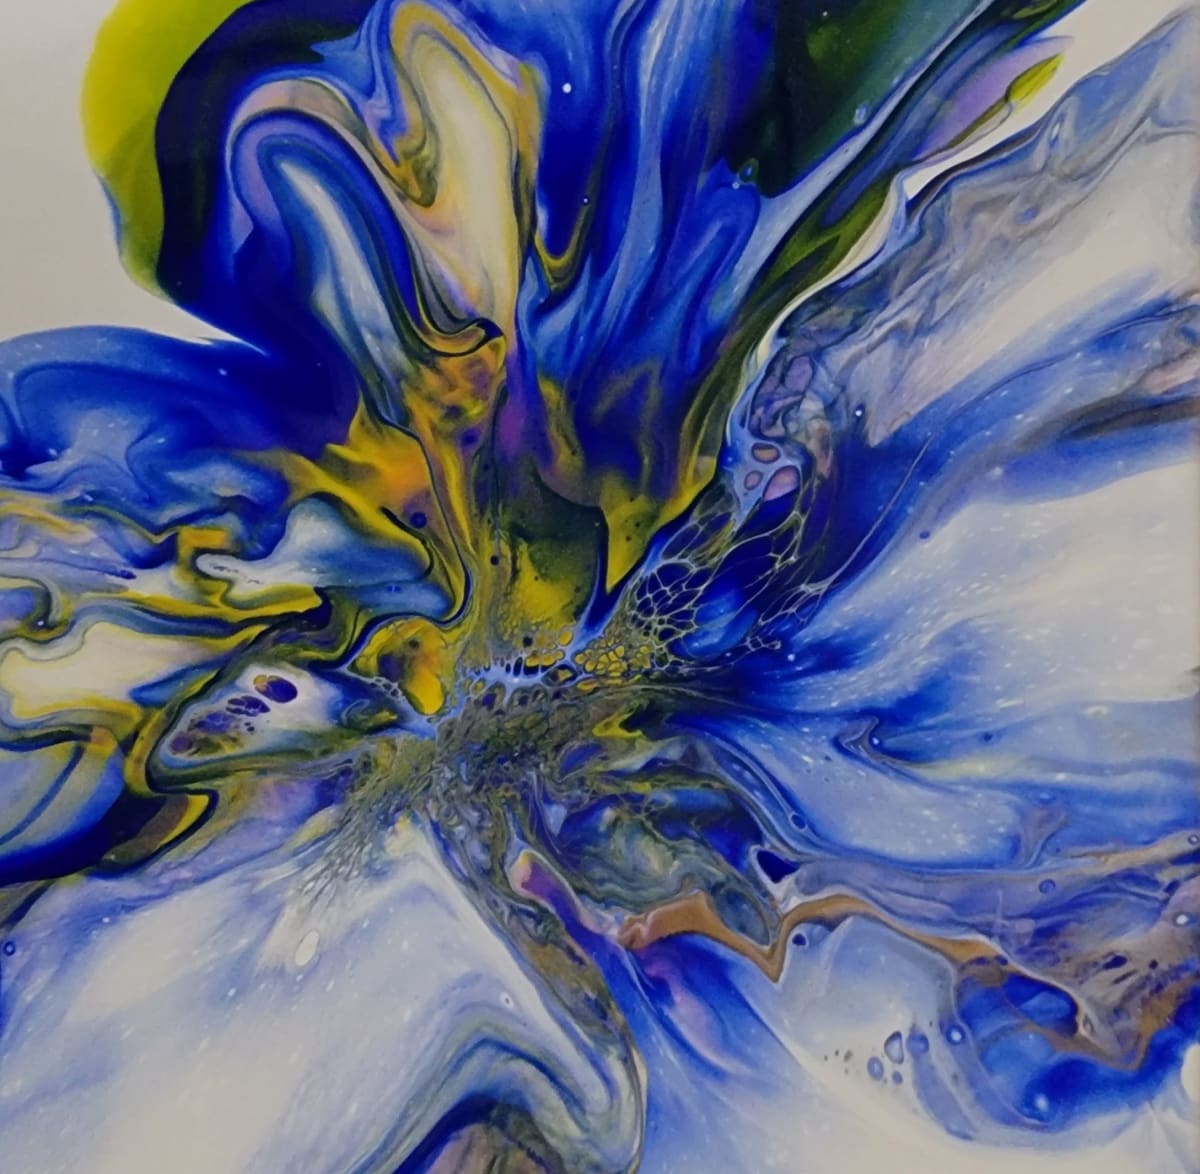 Exploded Bloom by Studio Relics by Linda joy Weinstein  Image: Exploded Bloom -Acrylic on a gallery wrapped canvas